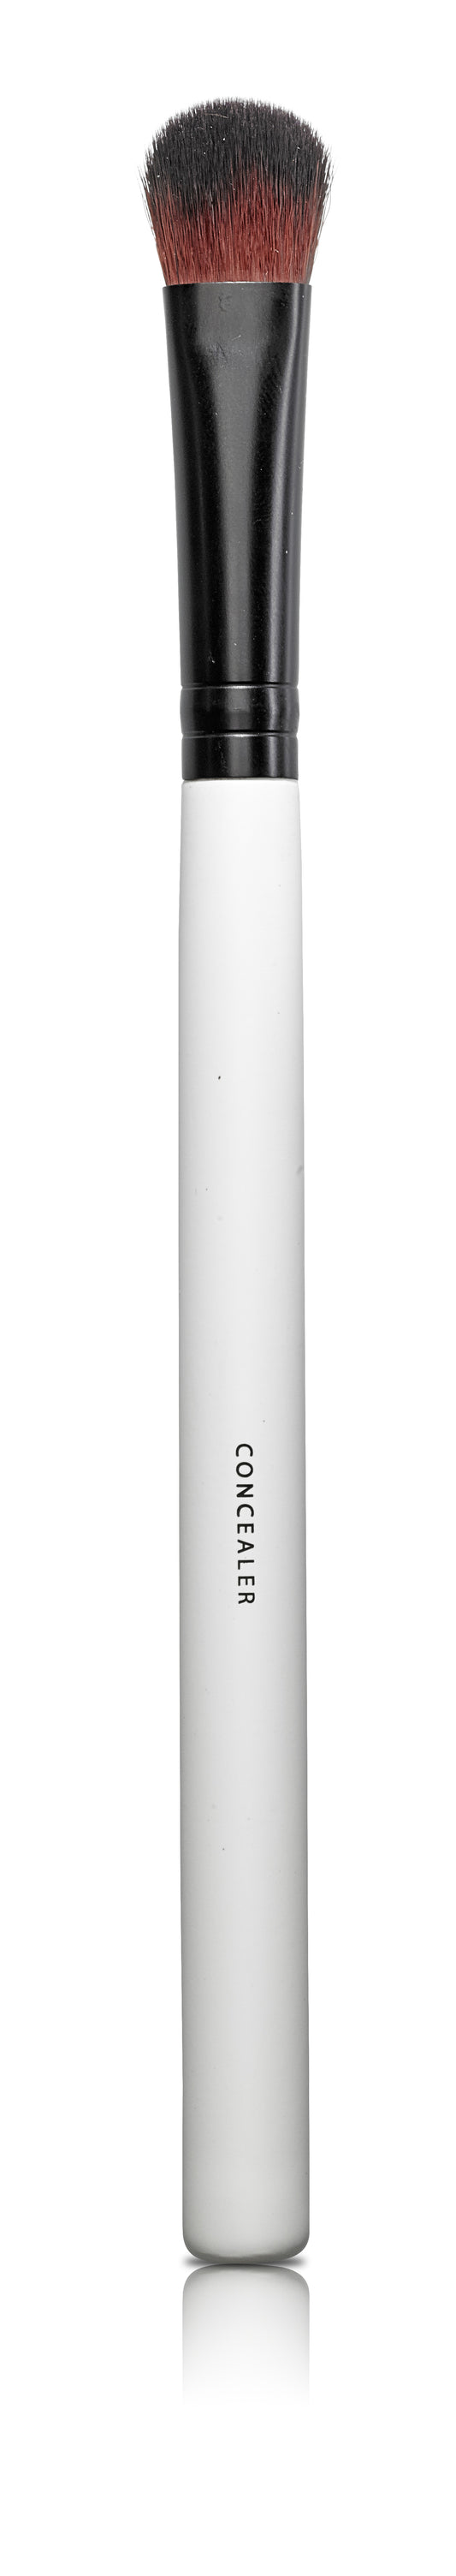 LILY LOLO - Concealer Brush - 1st